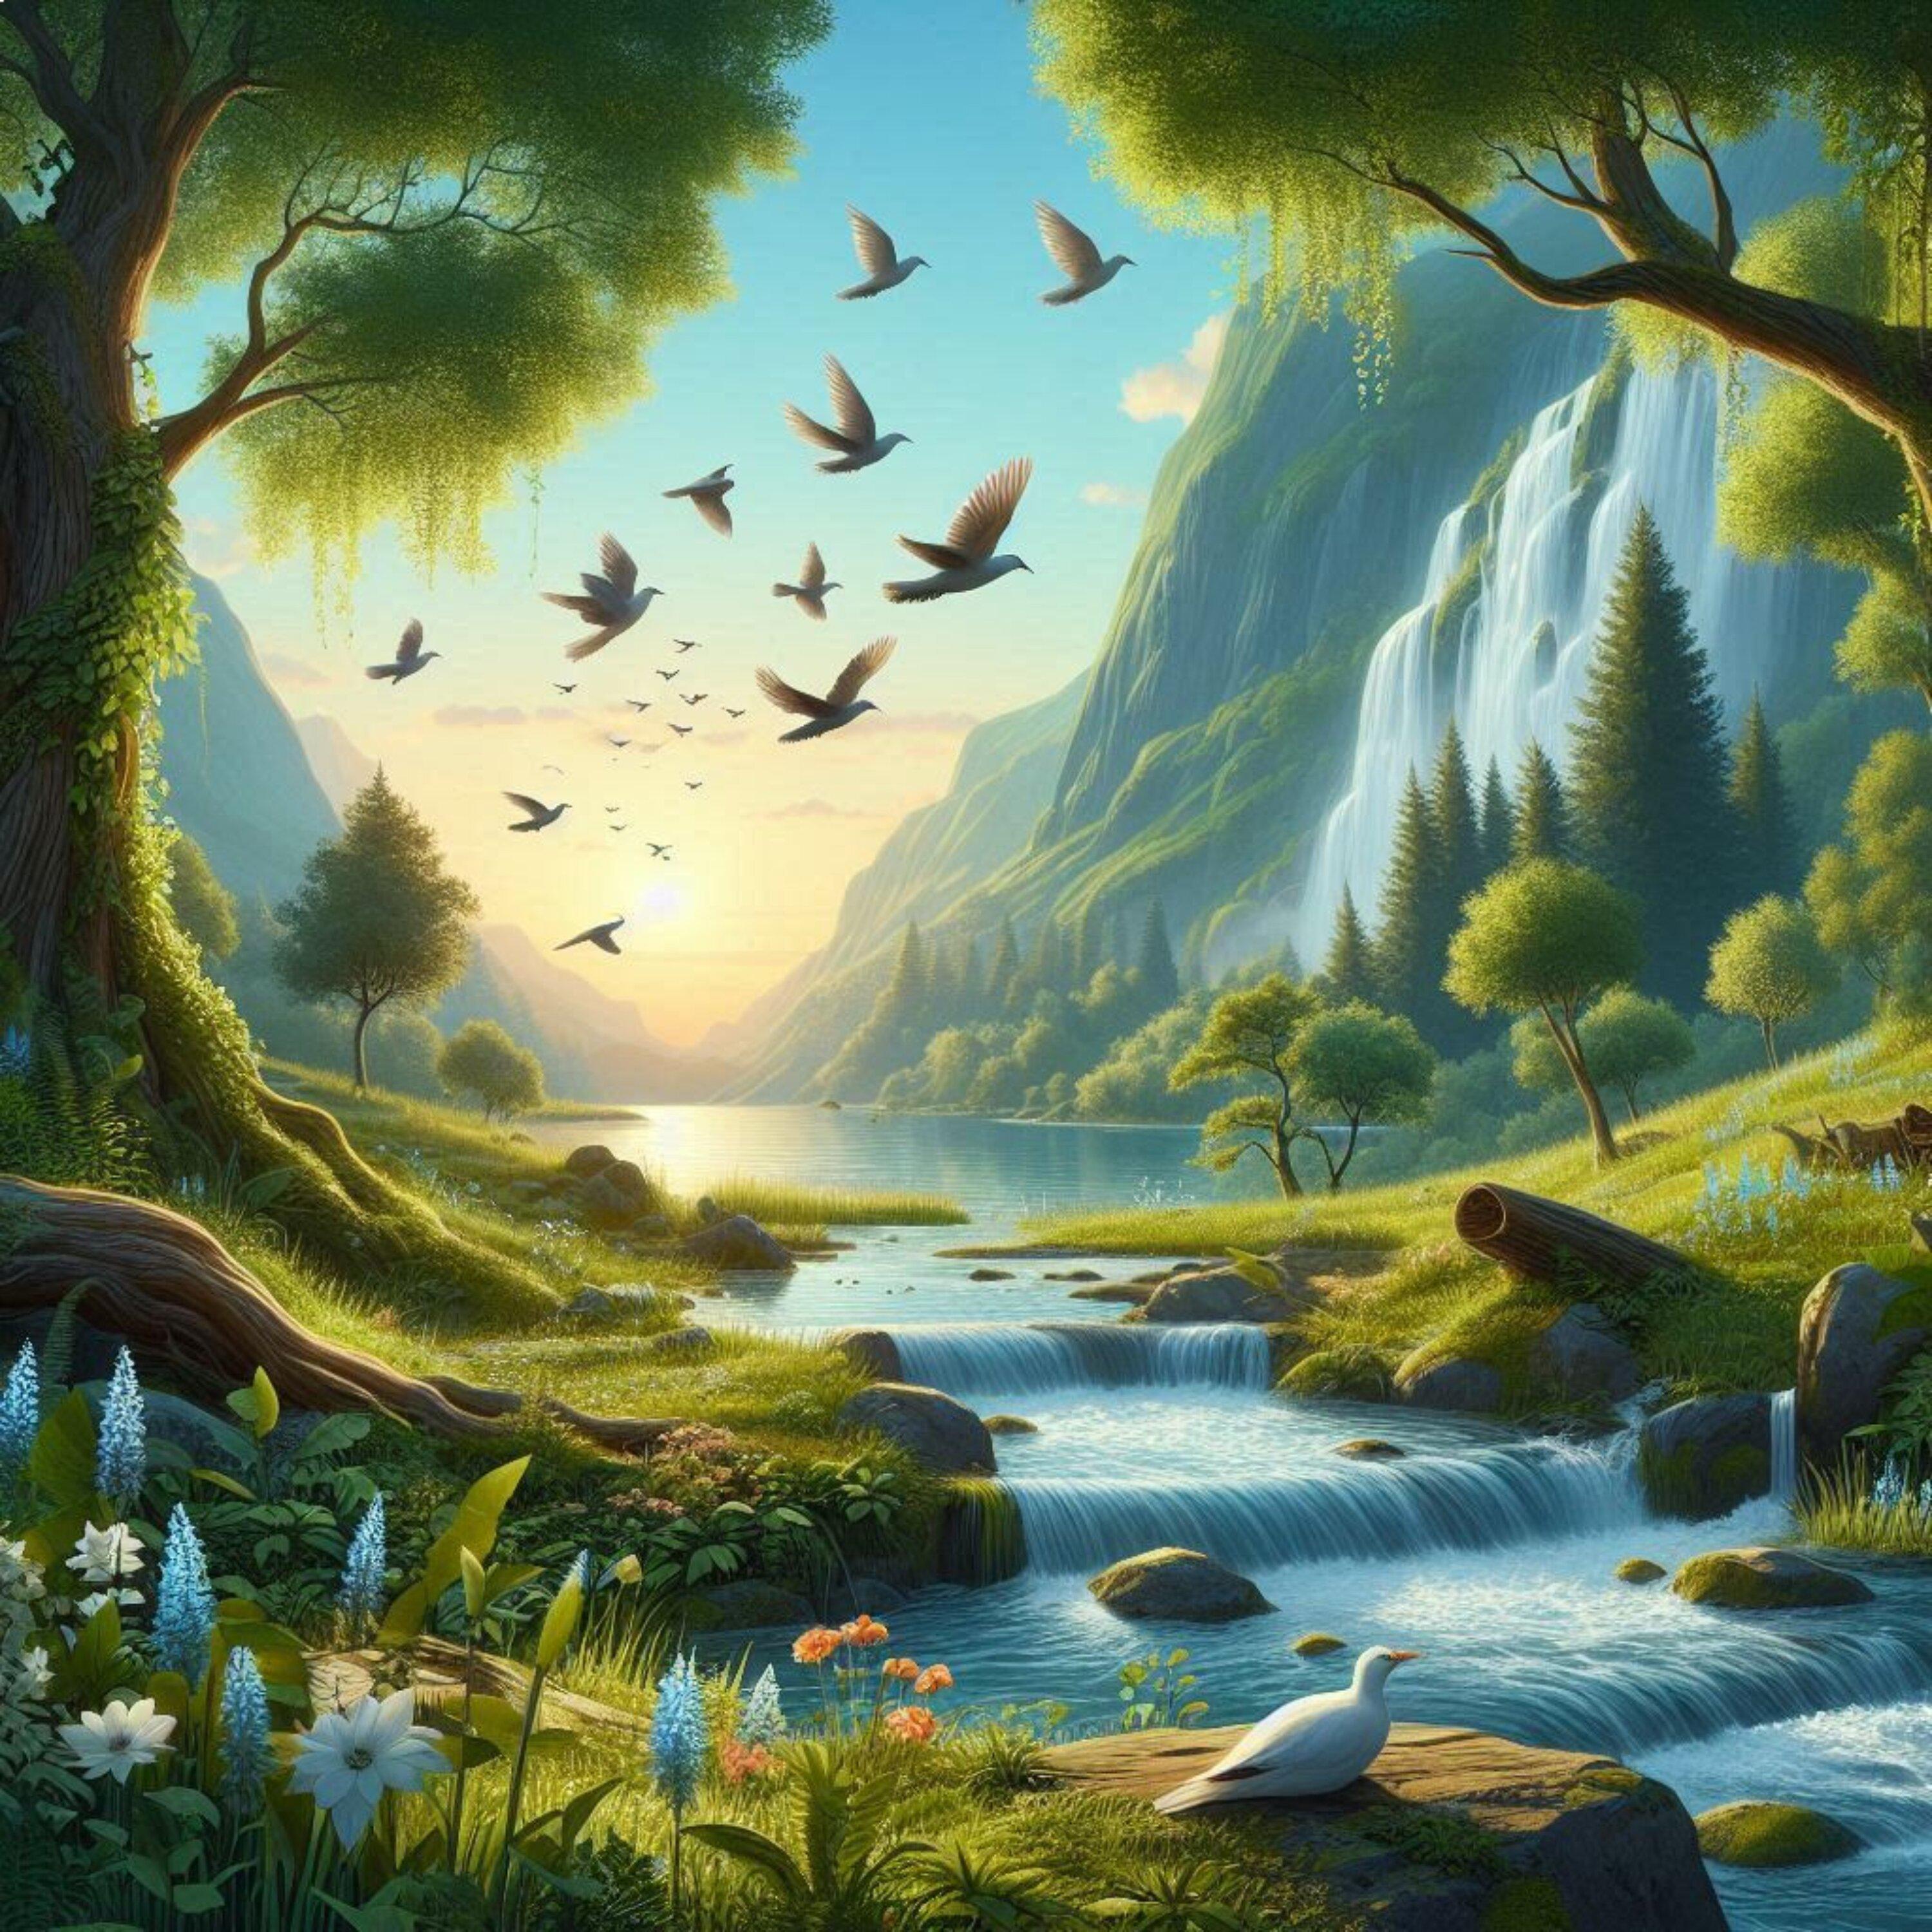 Zarek Atlas - Relaxing Landscape with Birds and Flowing Water in the Background 5